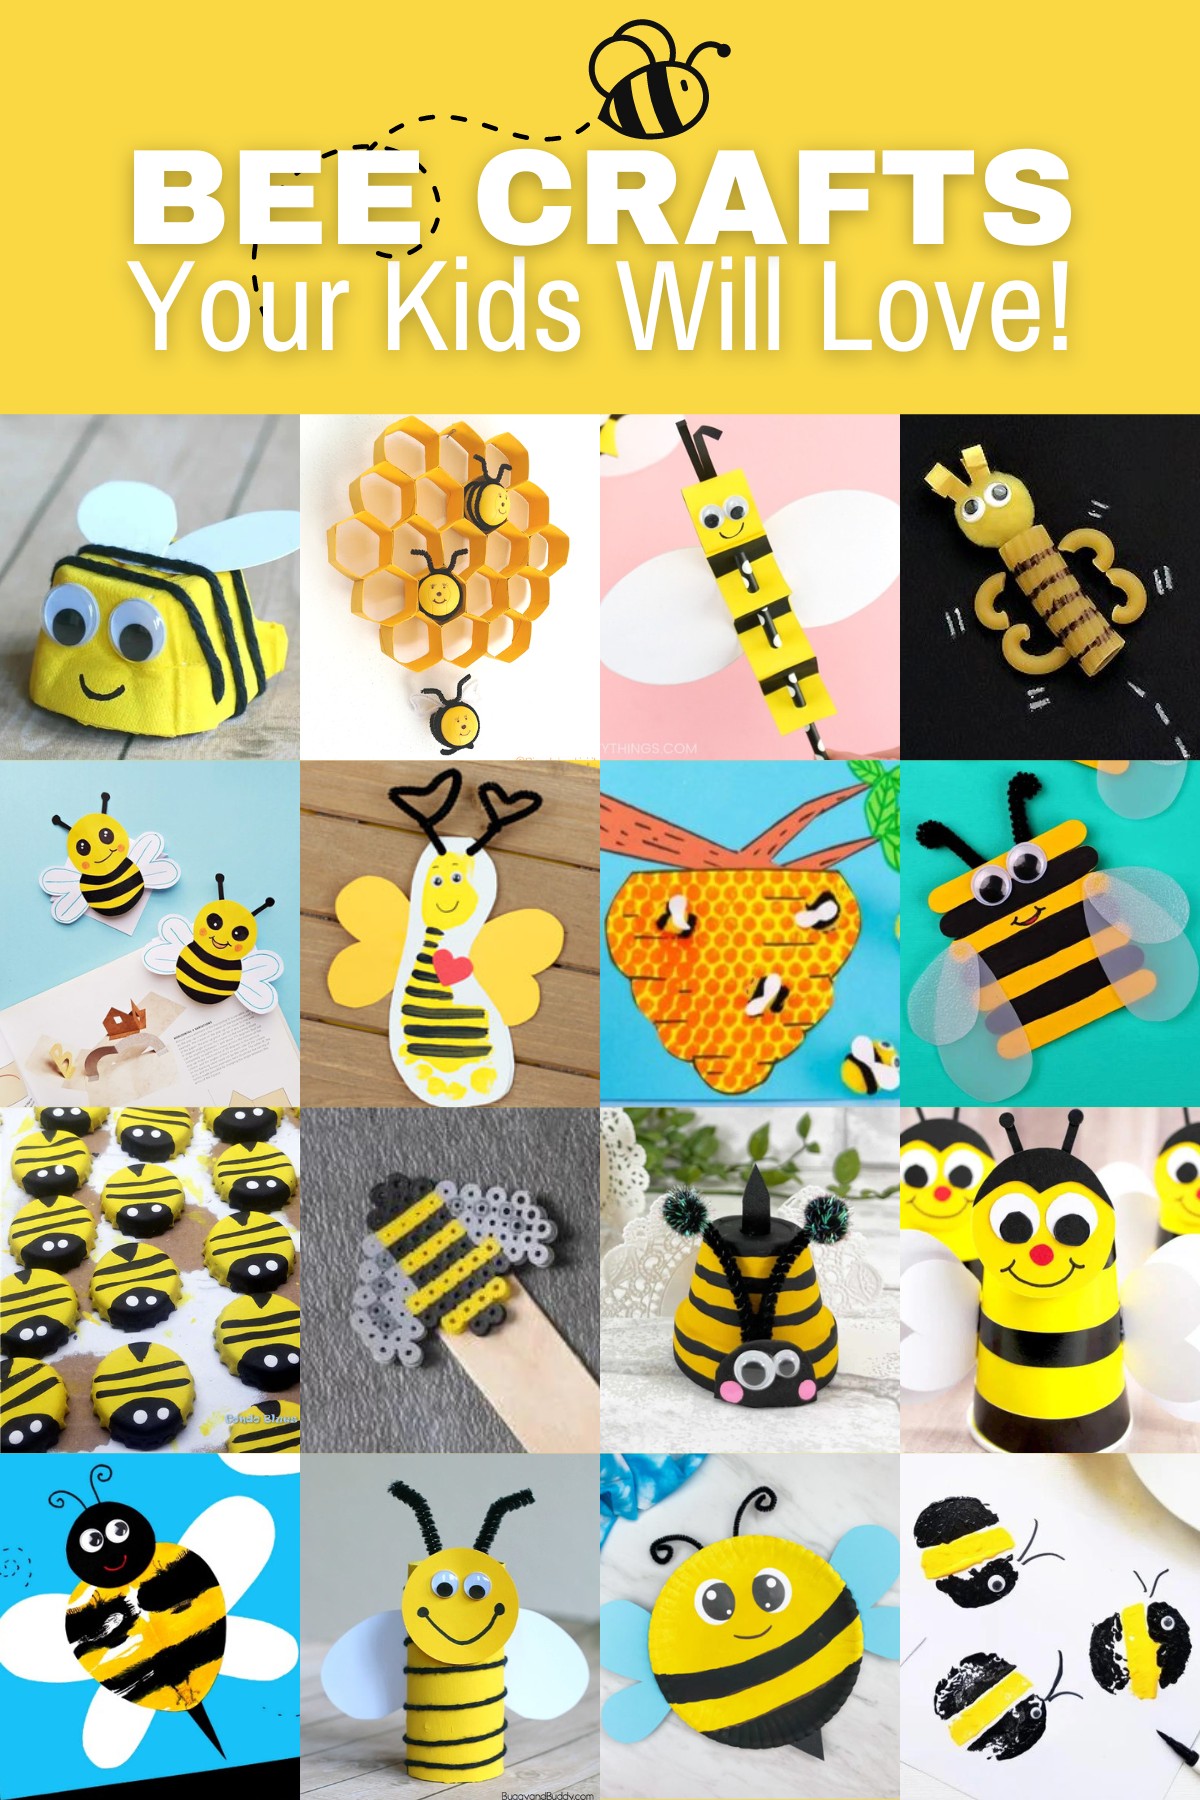 How to Make a Pipe Cleaner Bee